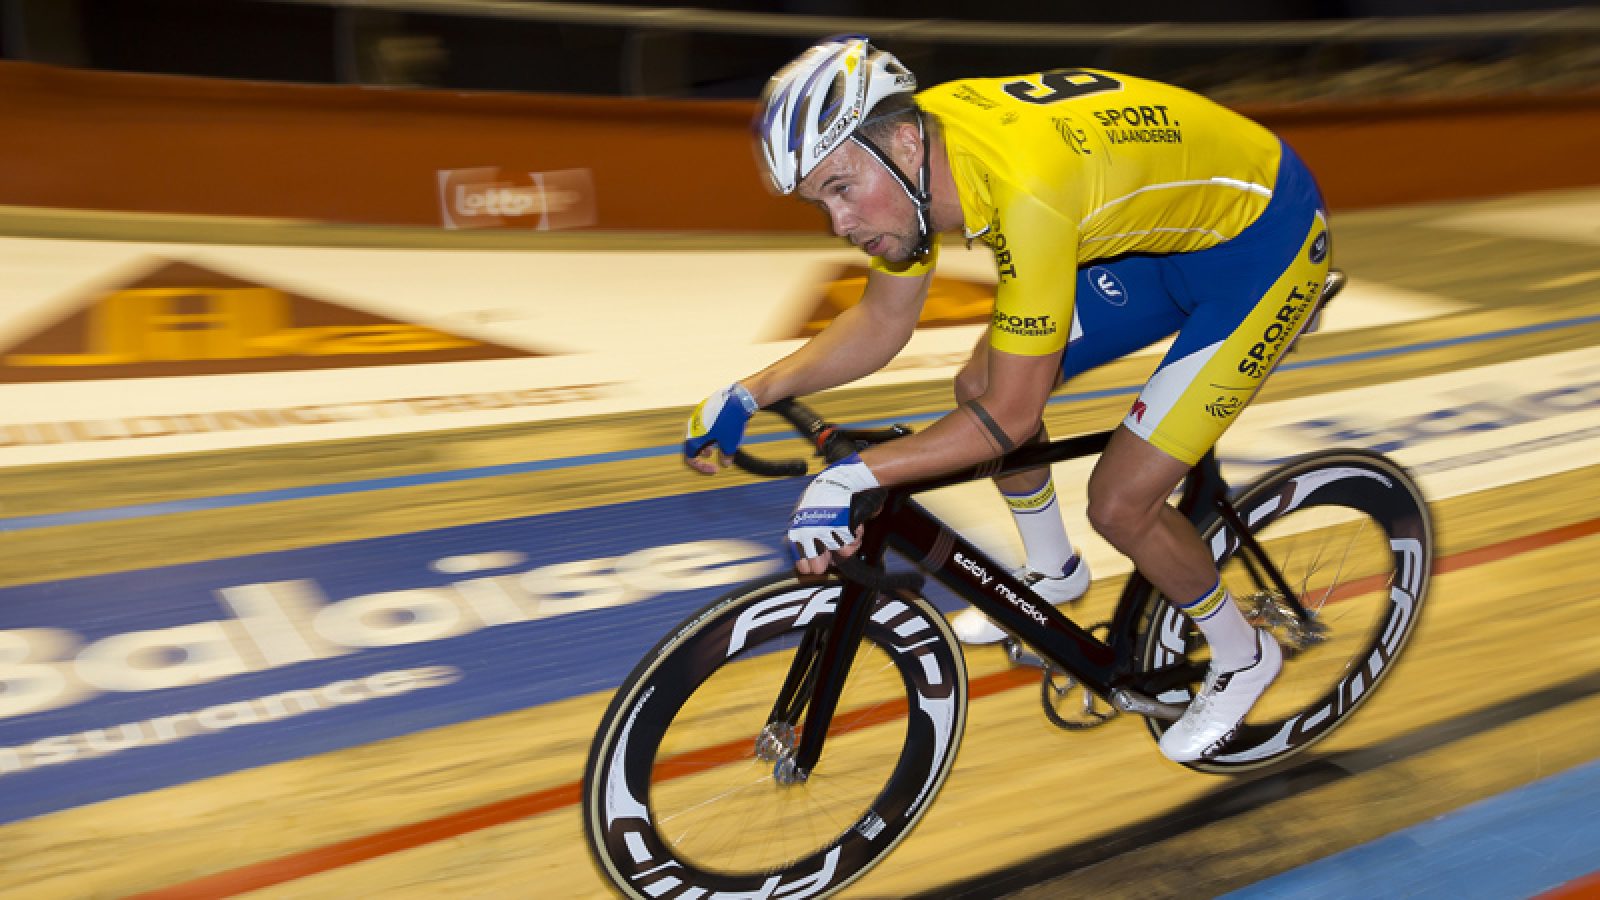 Belgian Moreno De Pauw pictured in action during the last day of the Zesdaagse Vlaanderen-Gent six-day indoor cycling race at the indoor cycling arena 't Kuipke, Saturday 17 November 2018, in Gent. This year's edition takes place from November 13th until November 18th. BELGA PHOTO KRISTOF VAN ACCOM